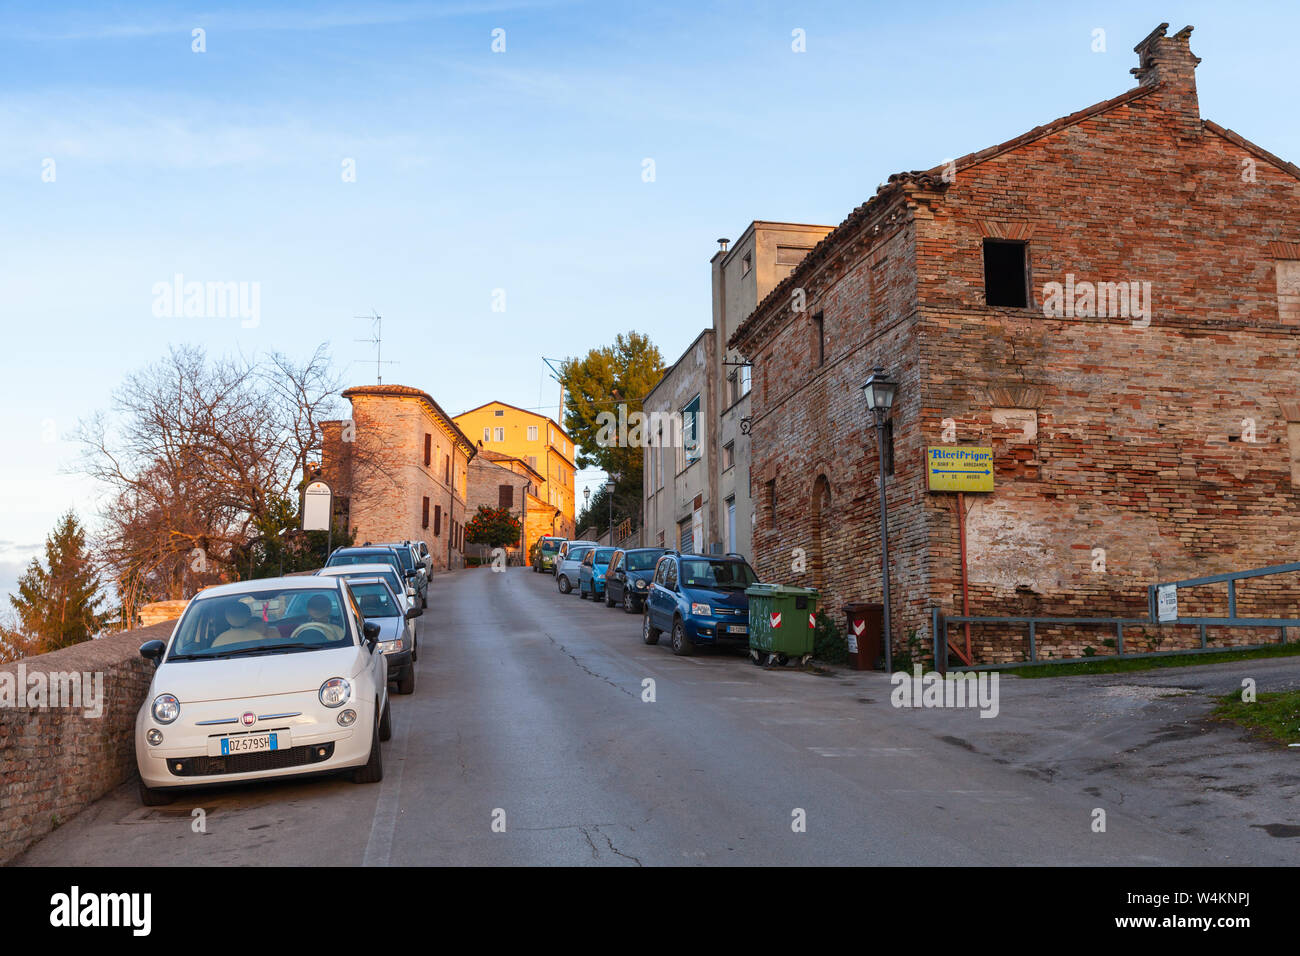 Fermo, Italy - February 8, 2016: Street view with old houses of Fermo, Italian town Stock Photo